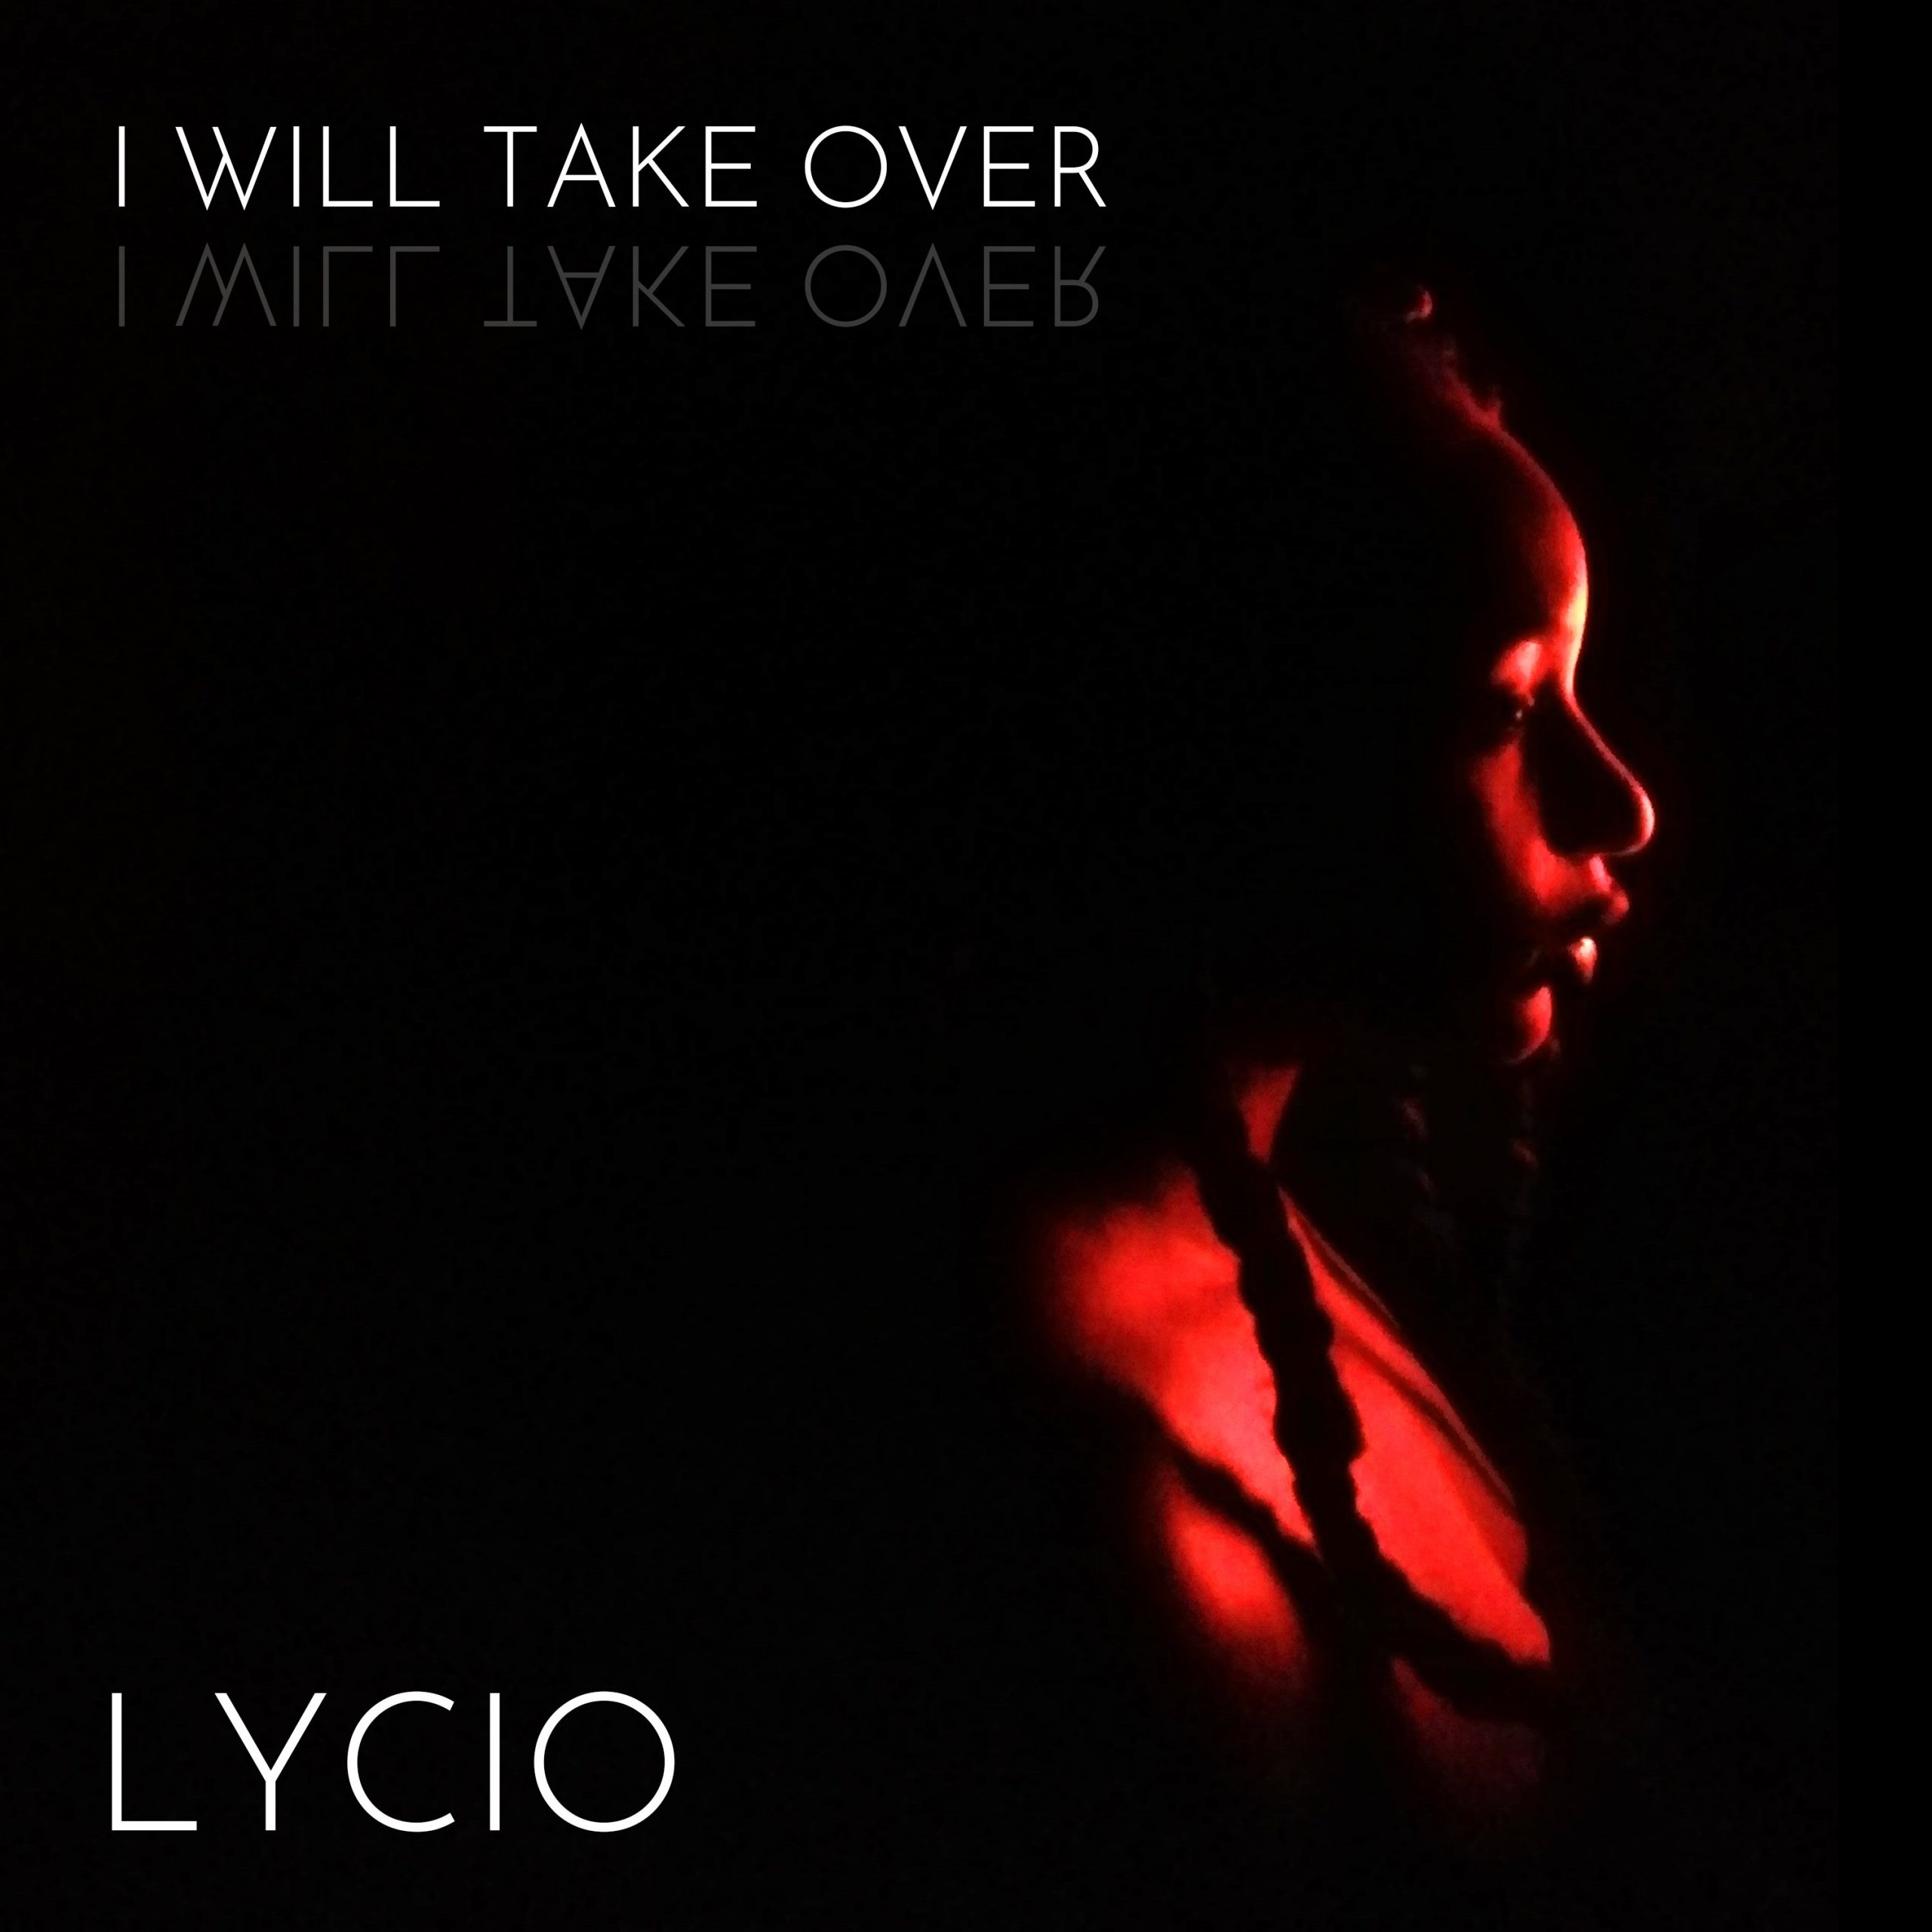 i will take over - lycio - uk - united kingdom - indie - indie music - indie pop - new music - music blog - wolf in a suit - wolfinasuit - wolf in a suit blog - wolf in a suit music blog